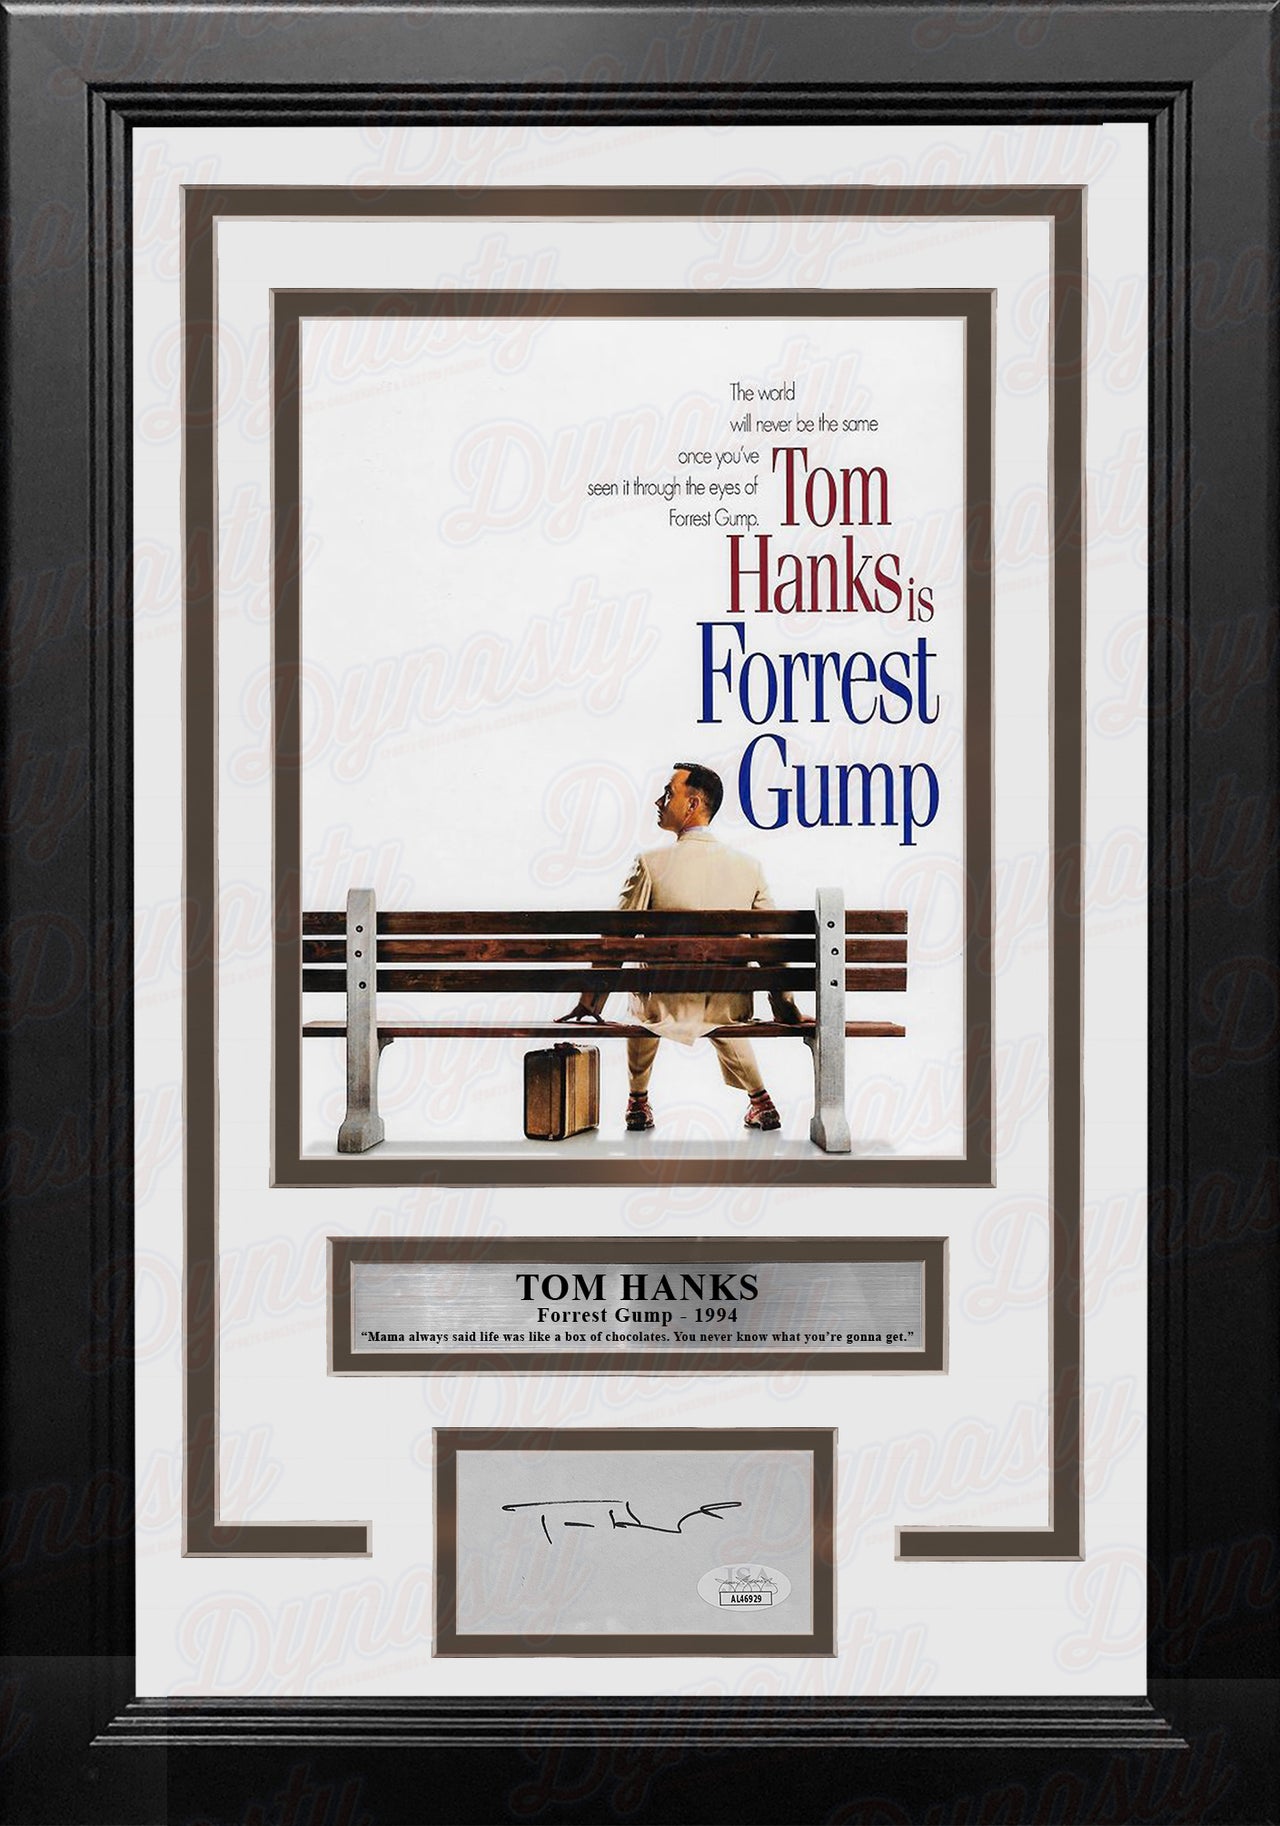 Tom Hank Forrest Gump 8" x 10" Framed Photo with Cut Signature